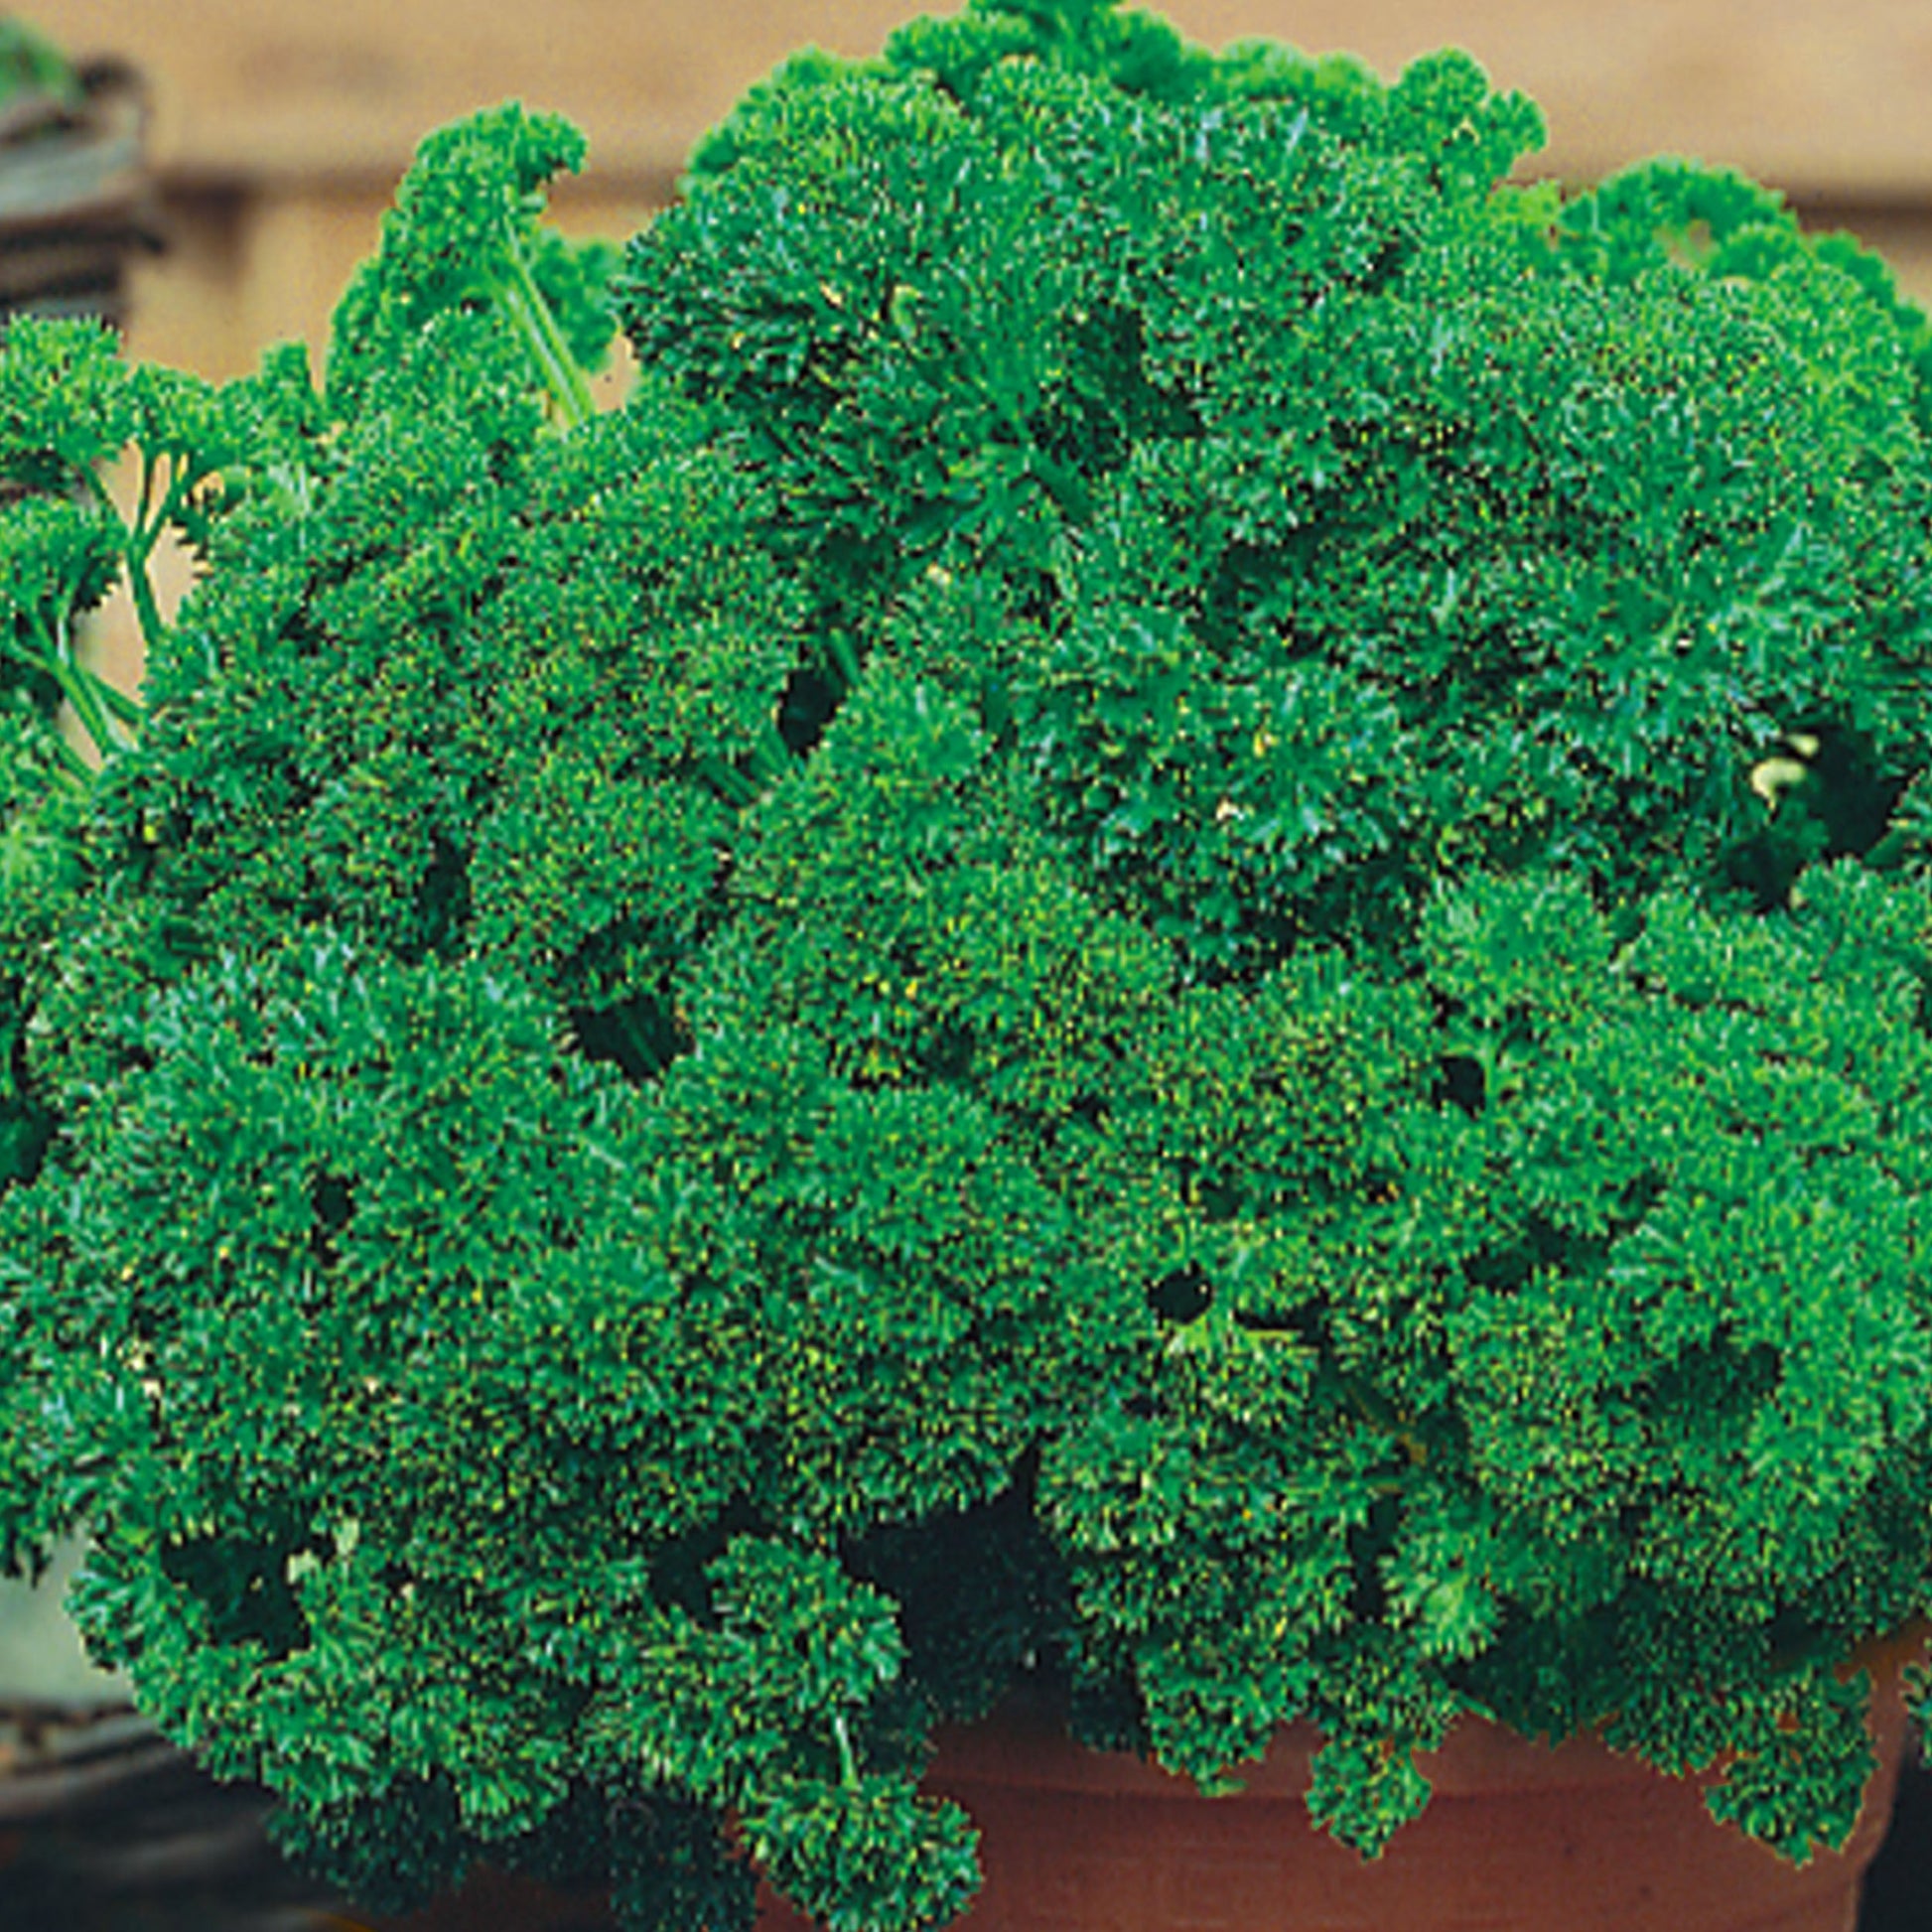 Extra Triple Curled Parsley seeds from Ferry Morse_Picture shows a growing curled parsley plant in a clay container.